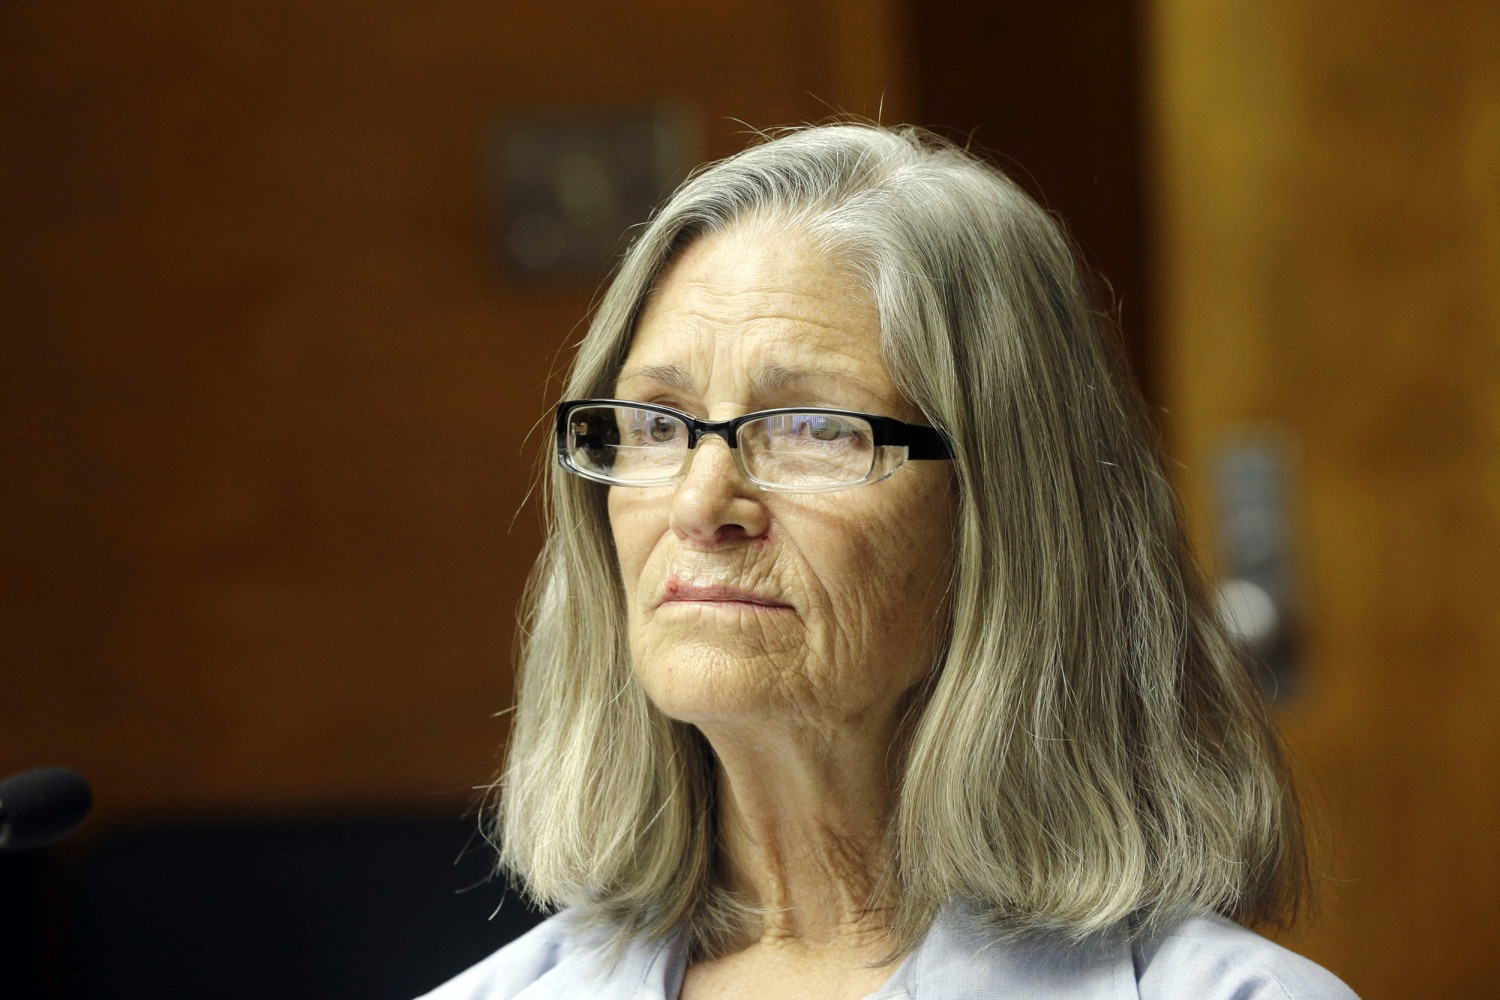 Former Charles Manson follower Leslie Van Houten is seen during a hearing before the California Board of Parole Hearings at the California Institution for Women in Chino, Calif., Thursday, April 14, 2016. Nick Ut / AP